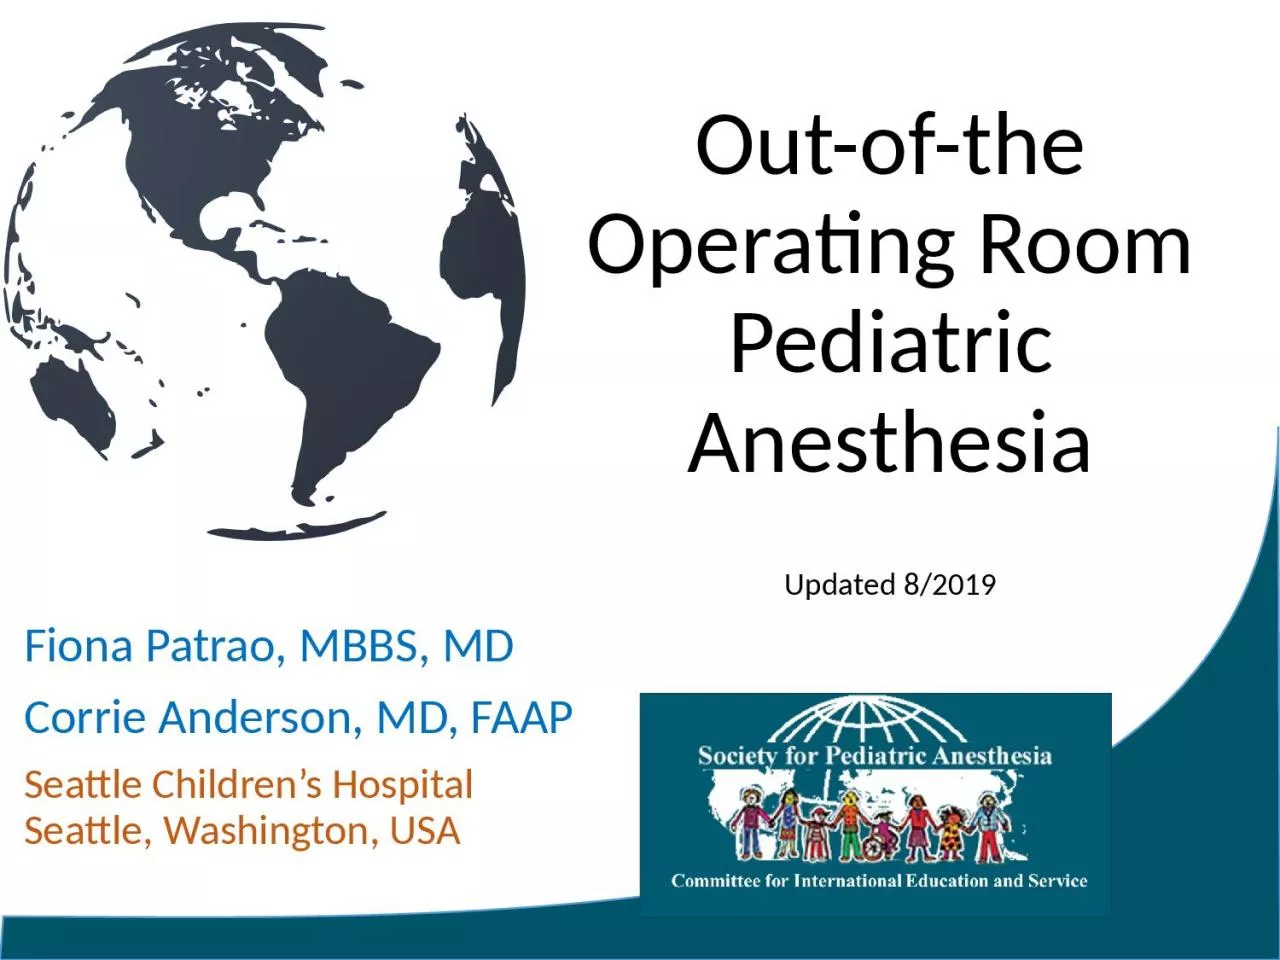 Out-of-the Operating Room Pediatric Anesthesia